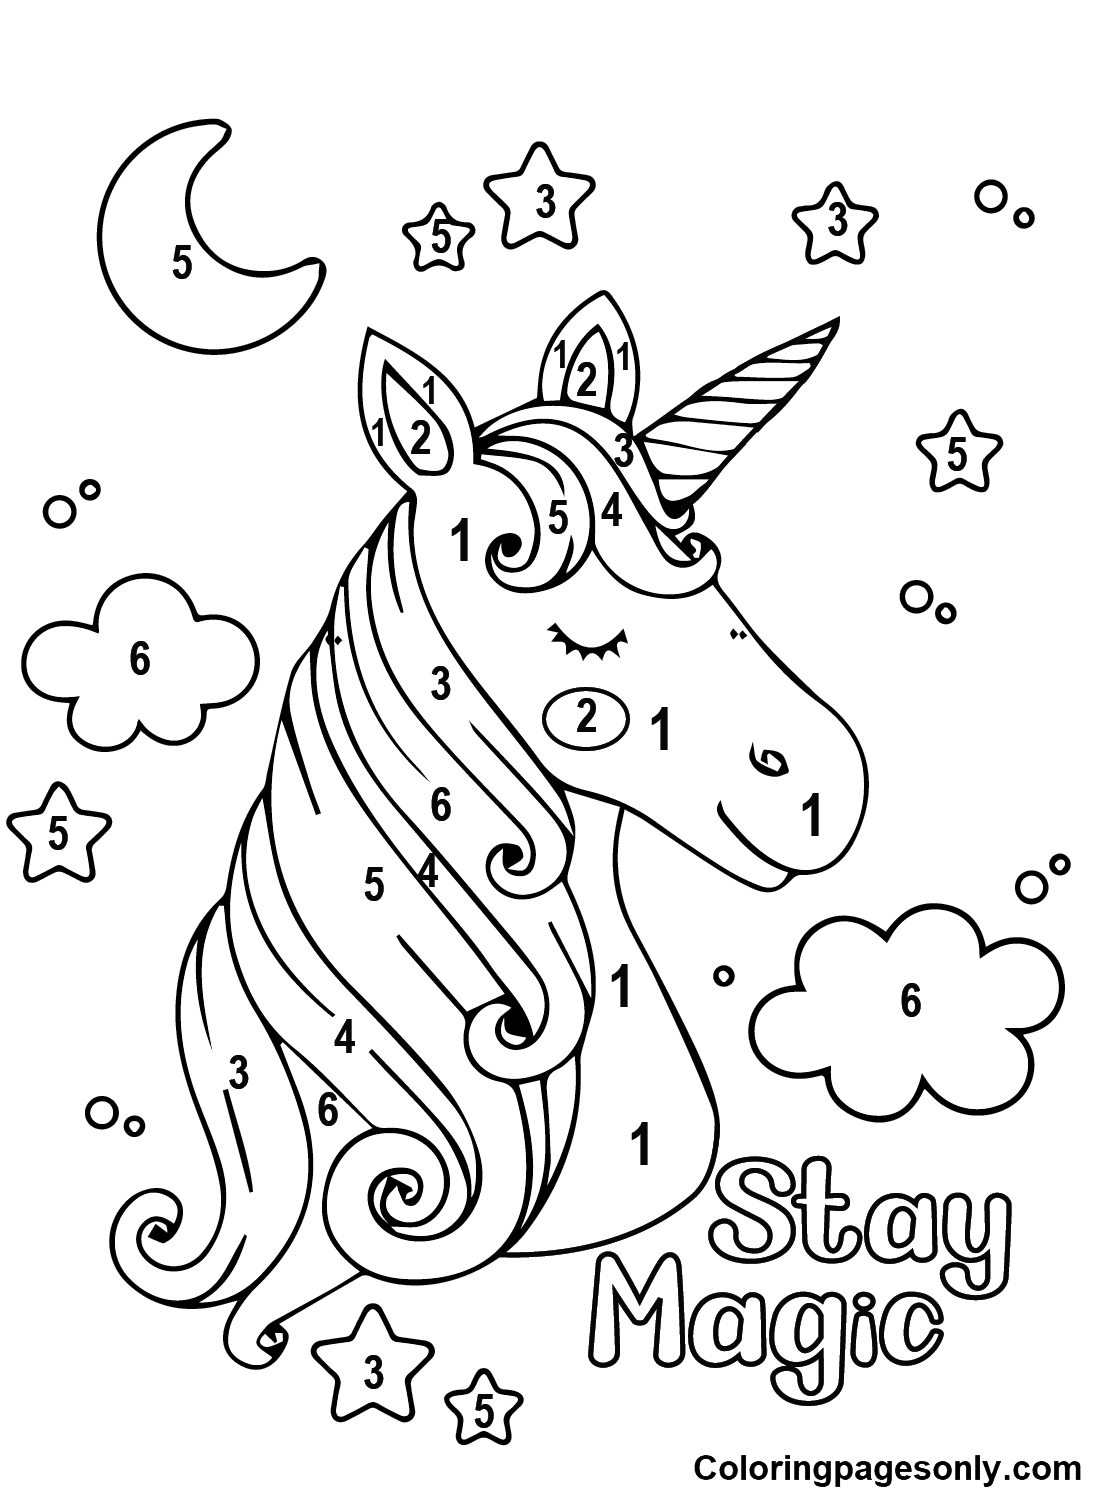 unicorn-color-by-number-free-coloring-pages-unicorn-color-by-number-coloring-pages-coloring